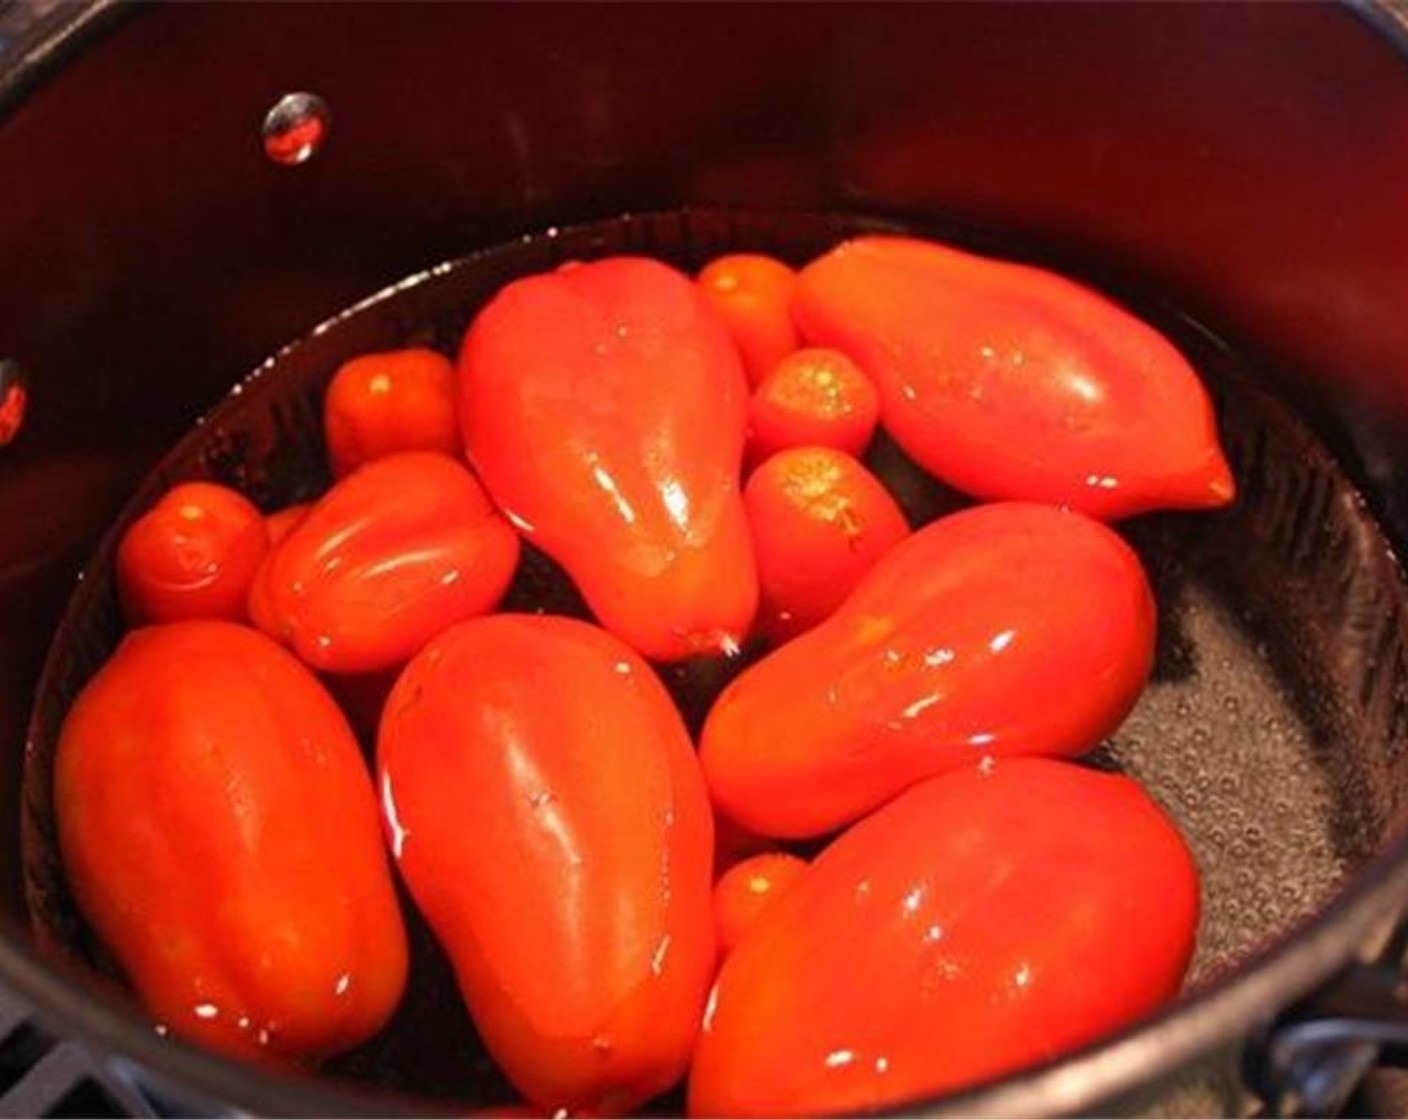 step 3 Place the tomatoes into the boiling water for 1-2 minutes. Smaller tomatoes will need less time, larger tomatoes will take longer.